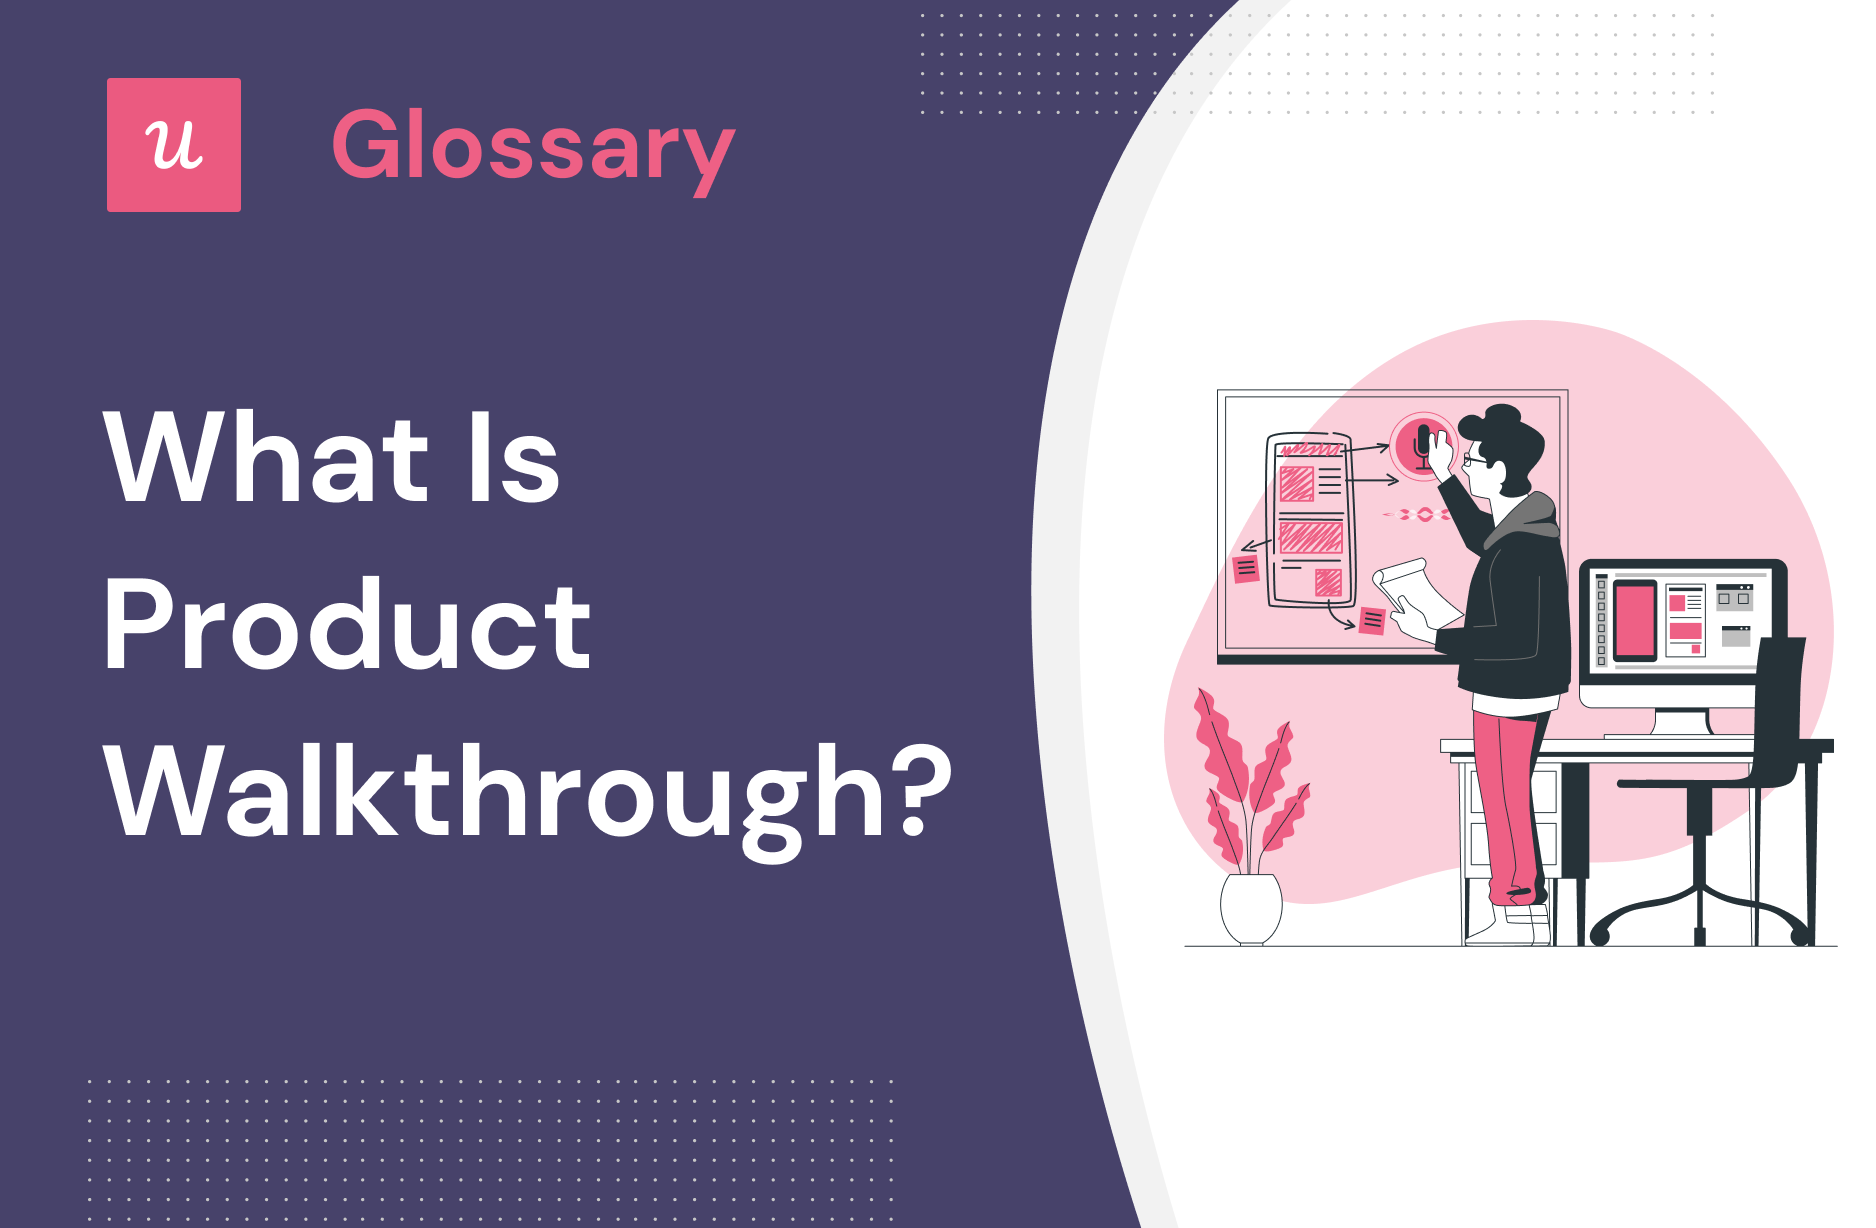 What is Product Walkthrough?